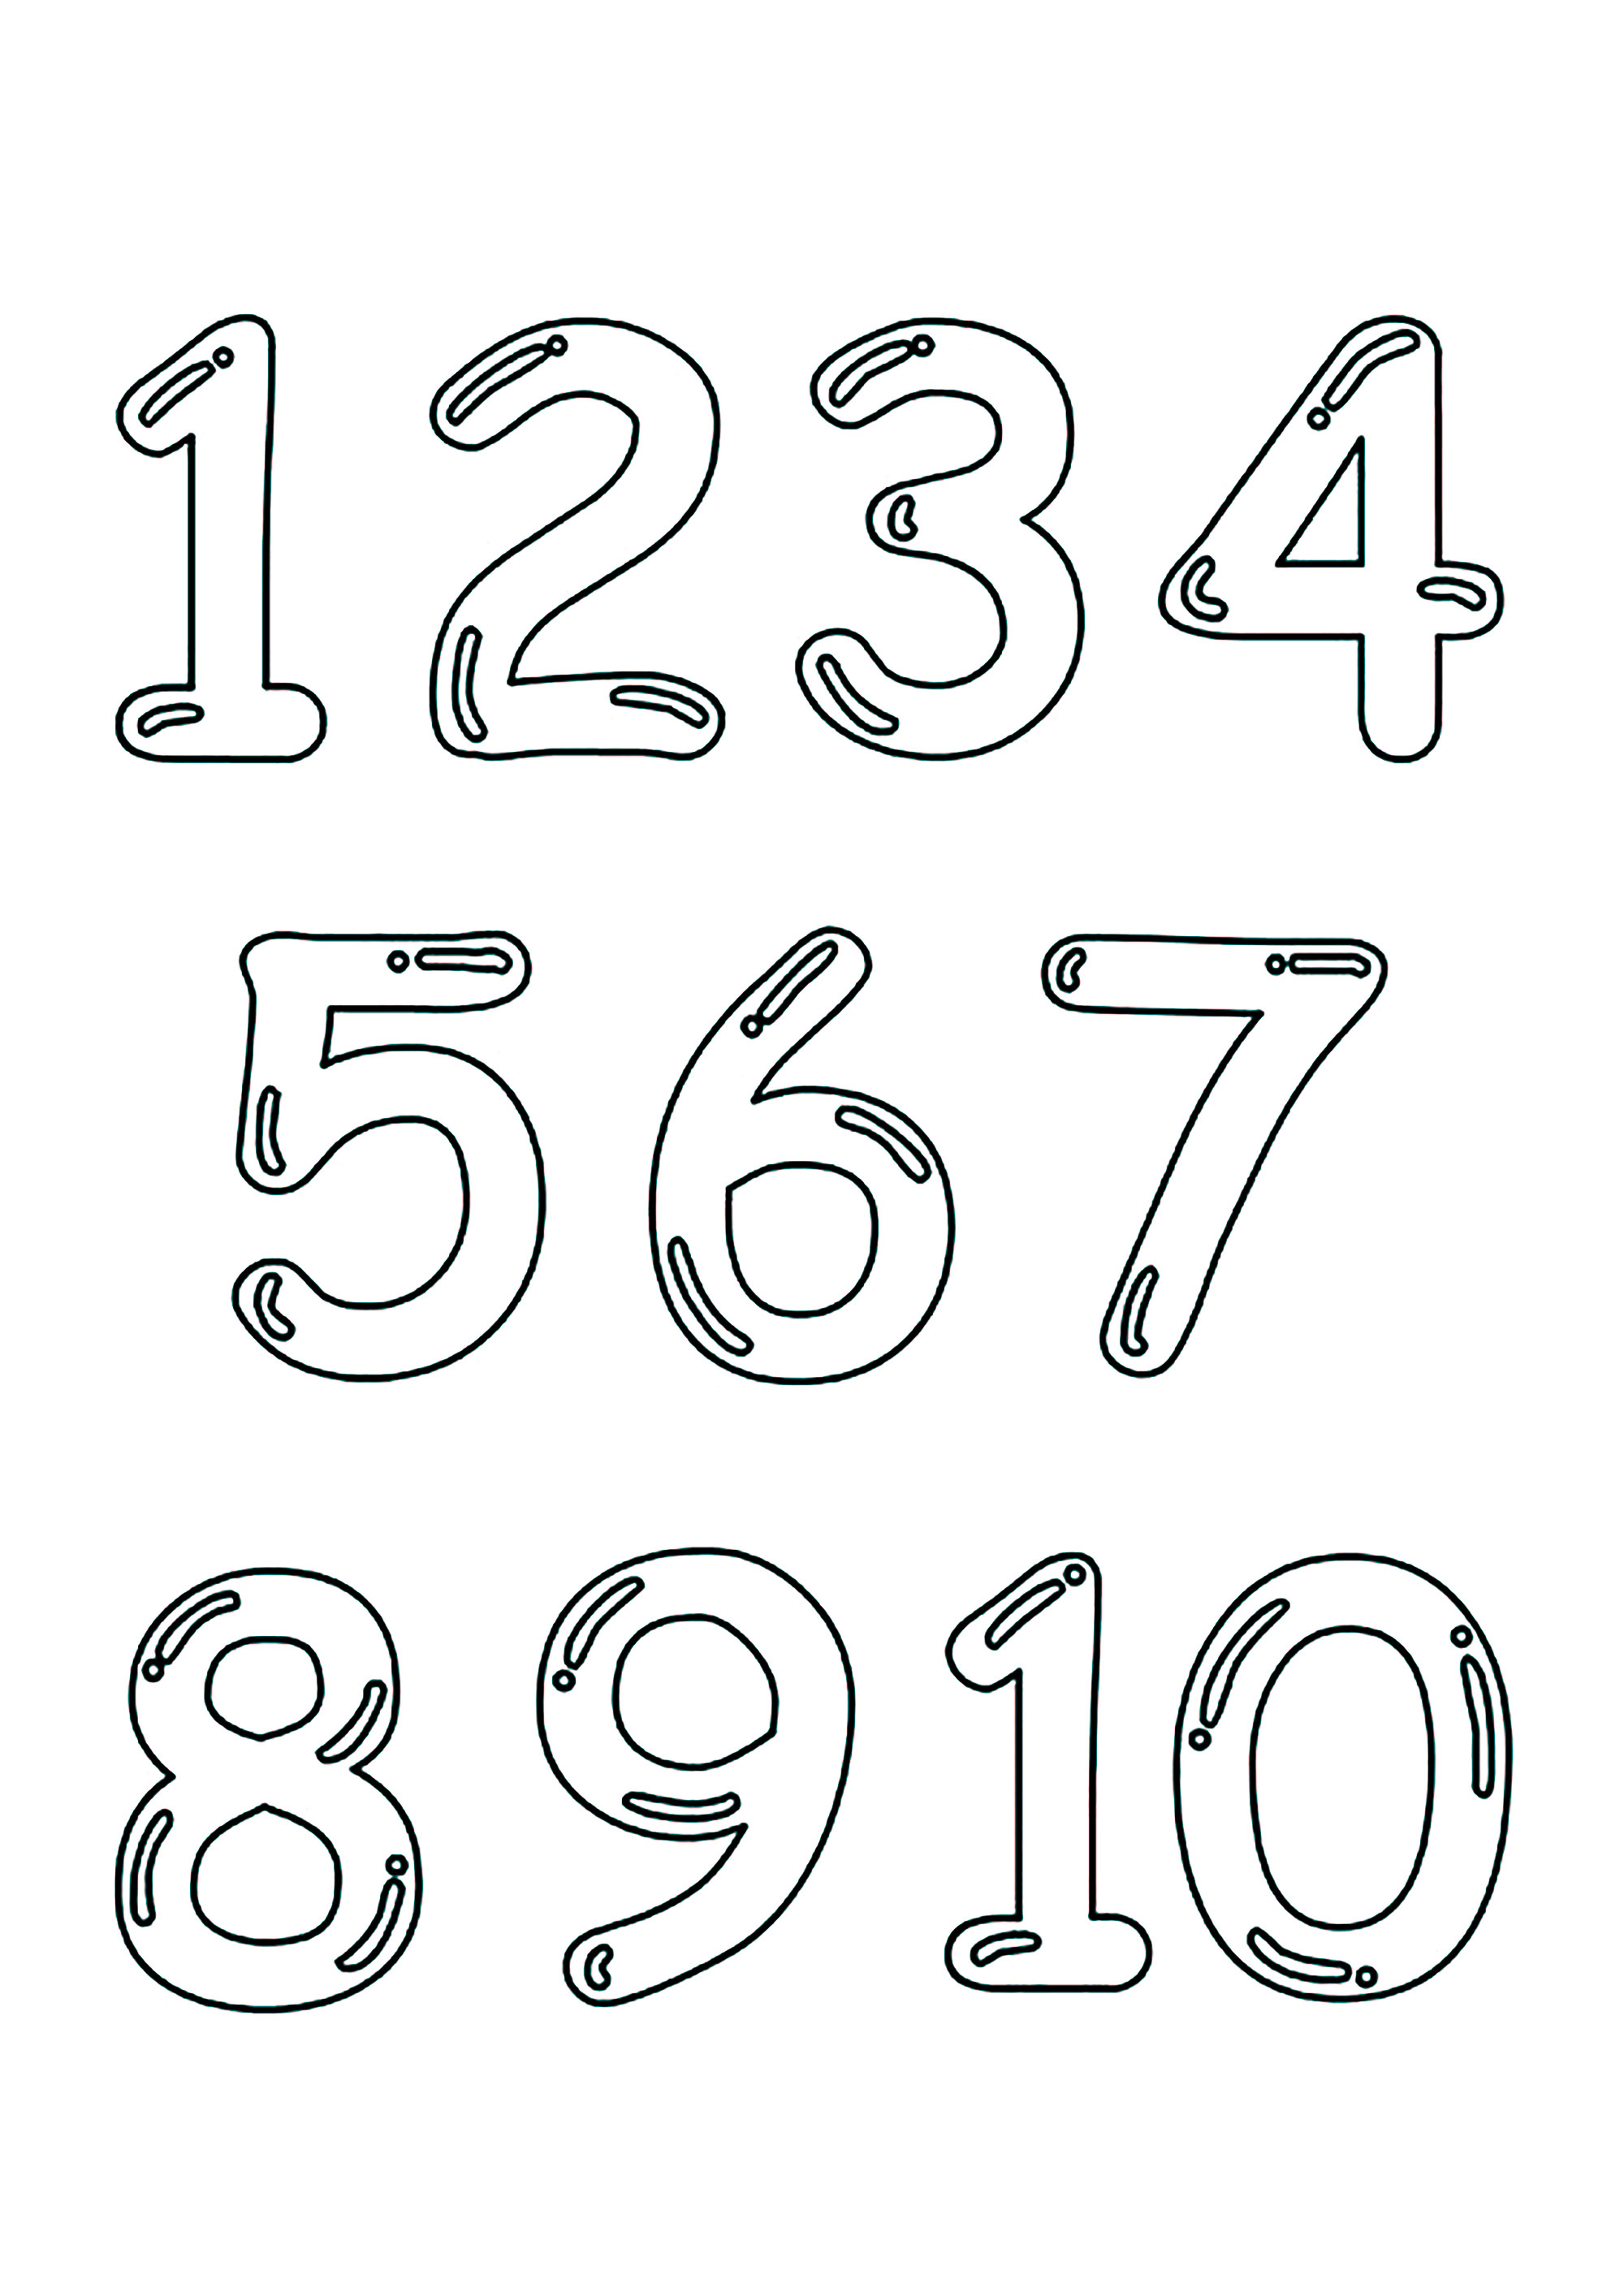 Simple drawing of numbers from 0 to 10. Color them in different colors!